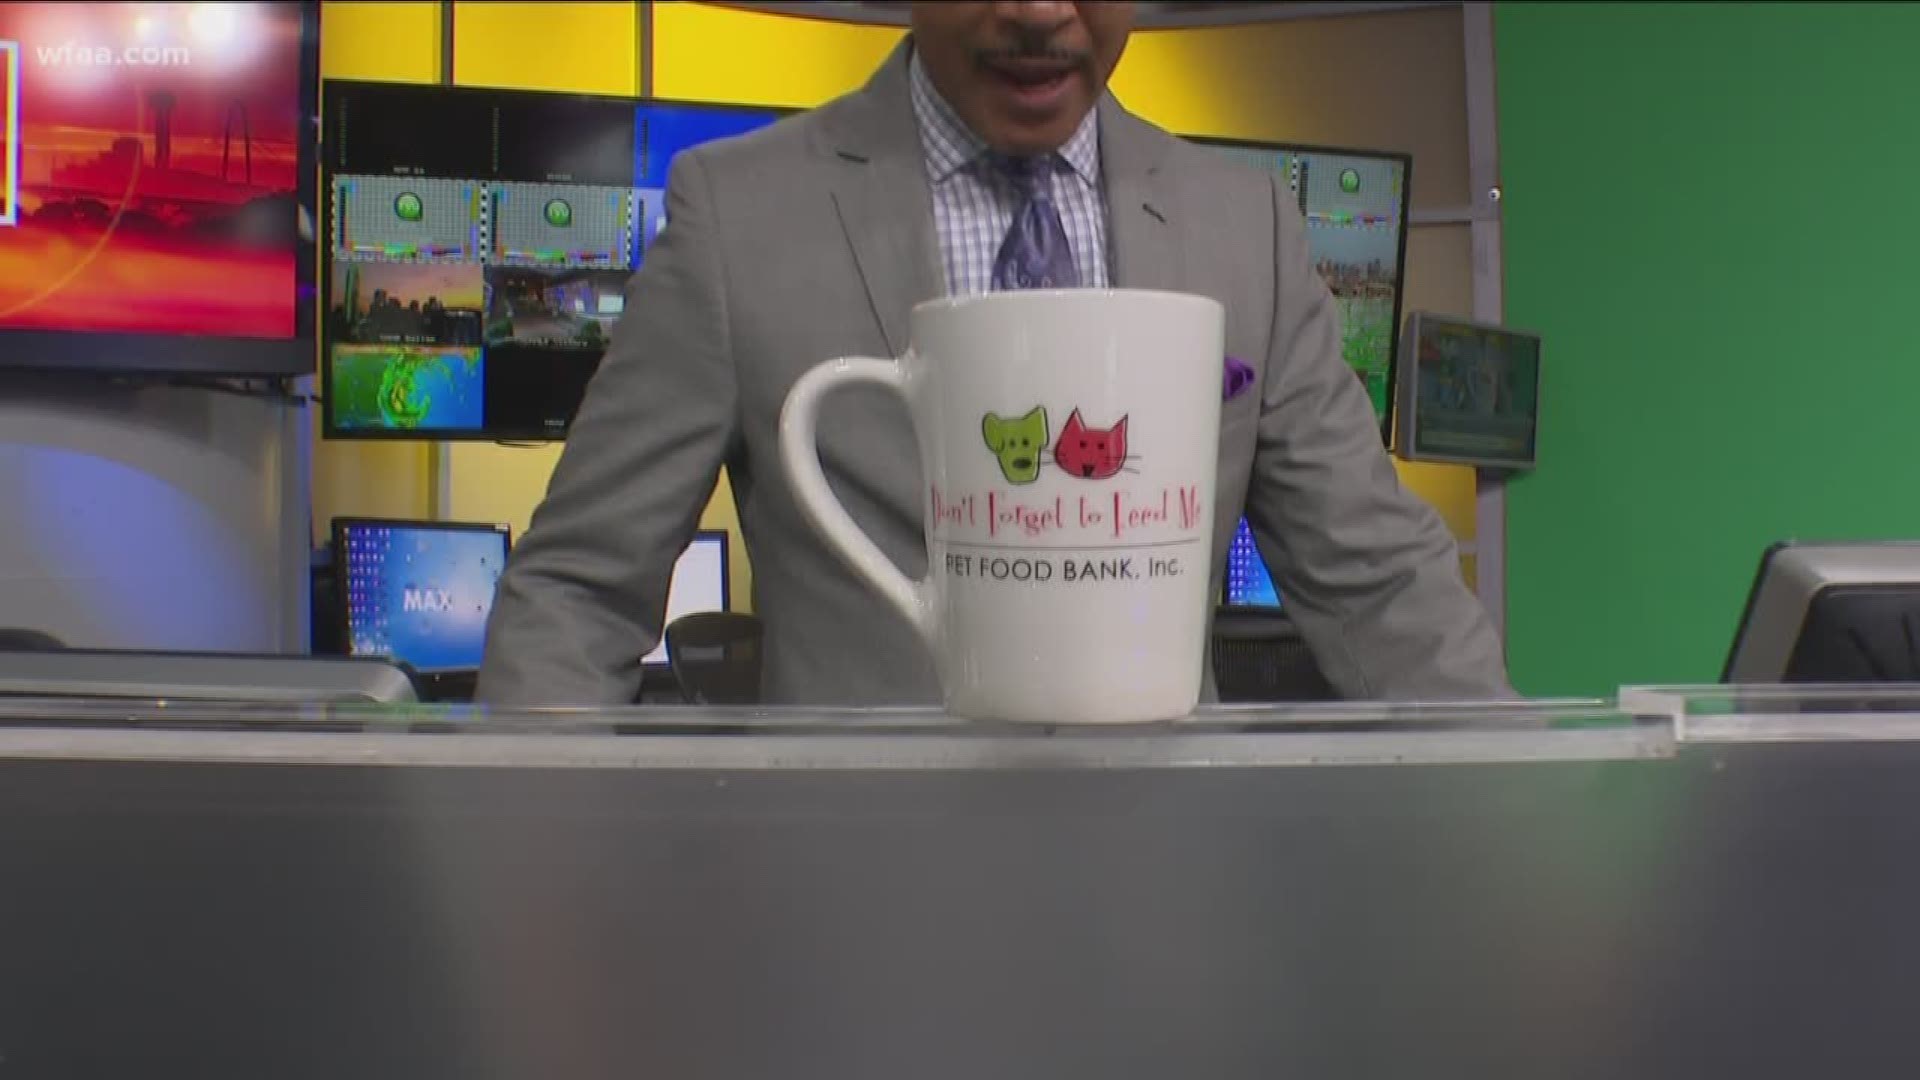 What's up with Greg Fields' cup? Don't Forget to Feed Me Pet Food Bank